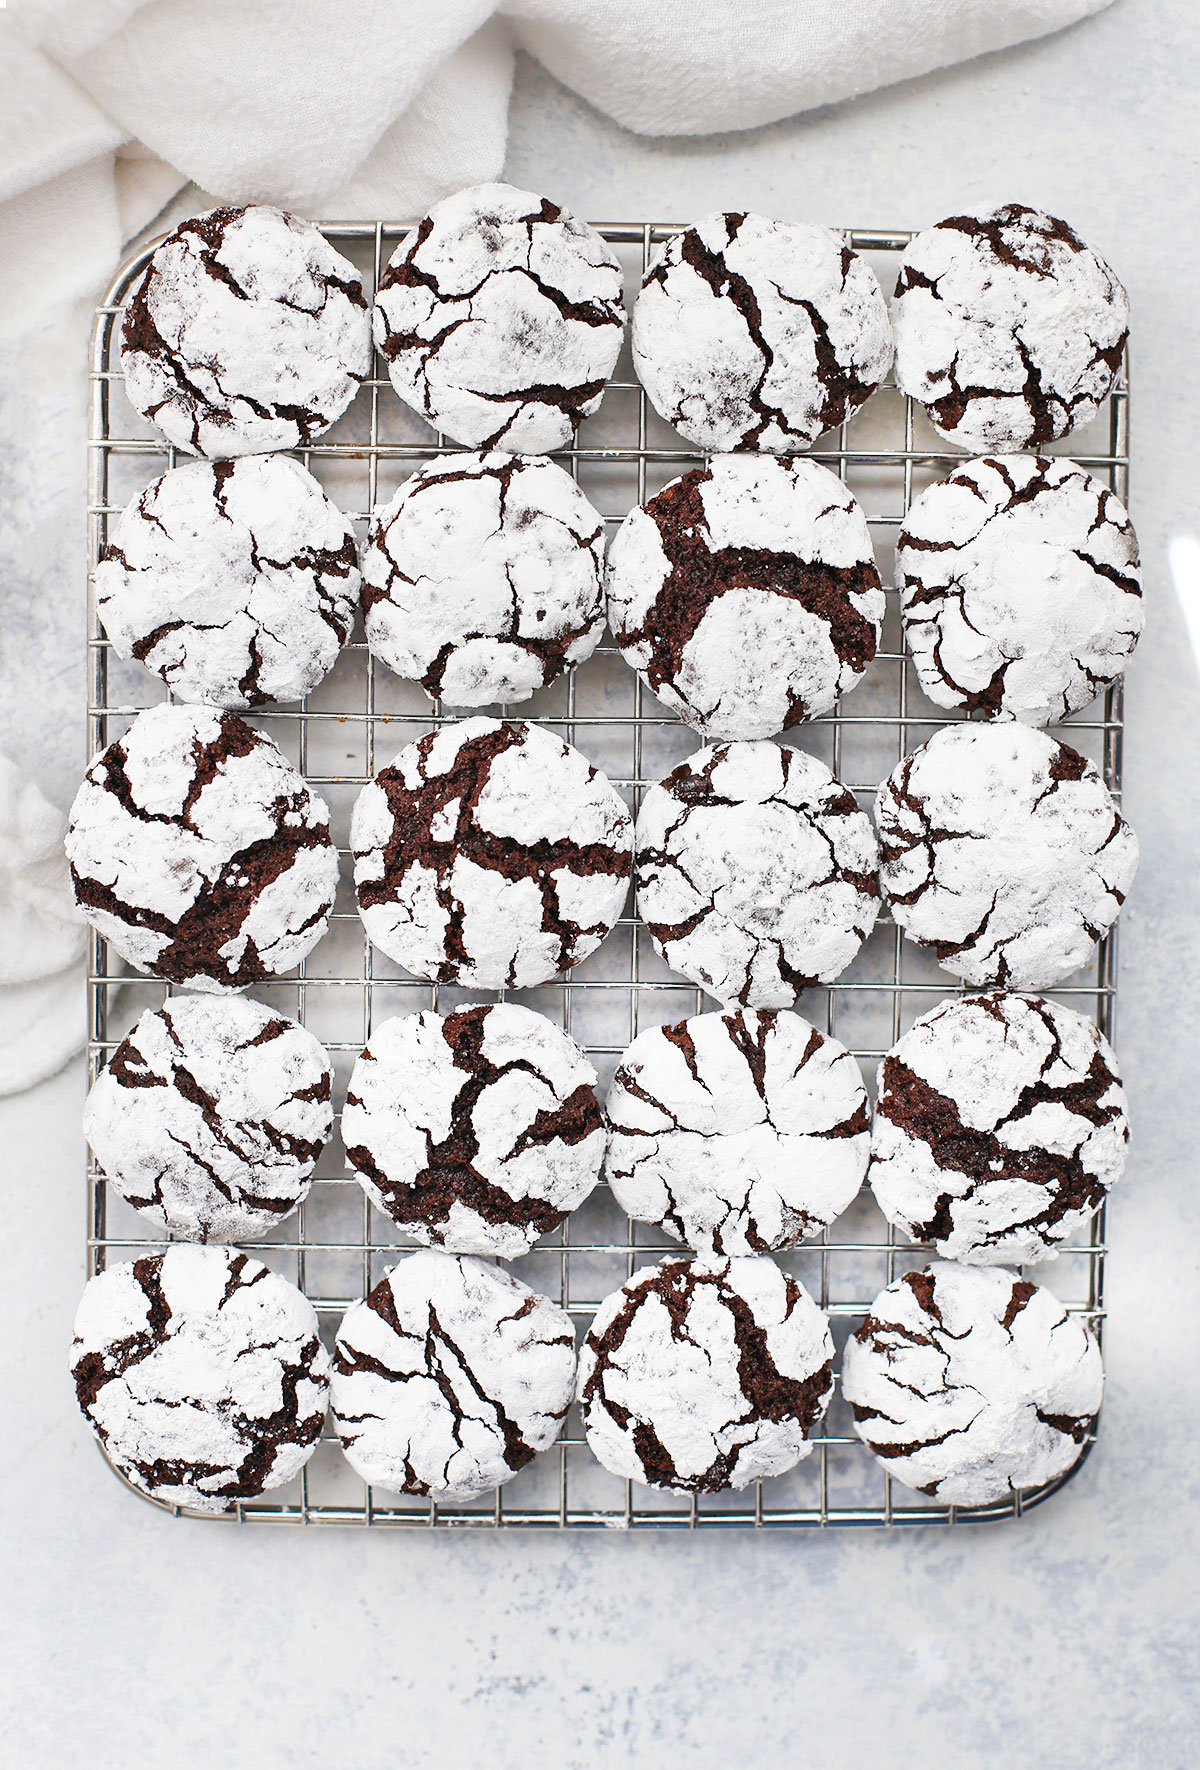 Overhead view of Gluten Free Chocolate Crinkle Cookies on a cooling rack